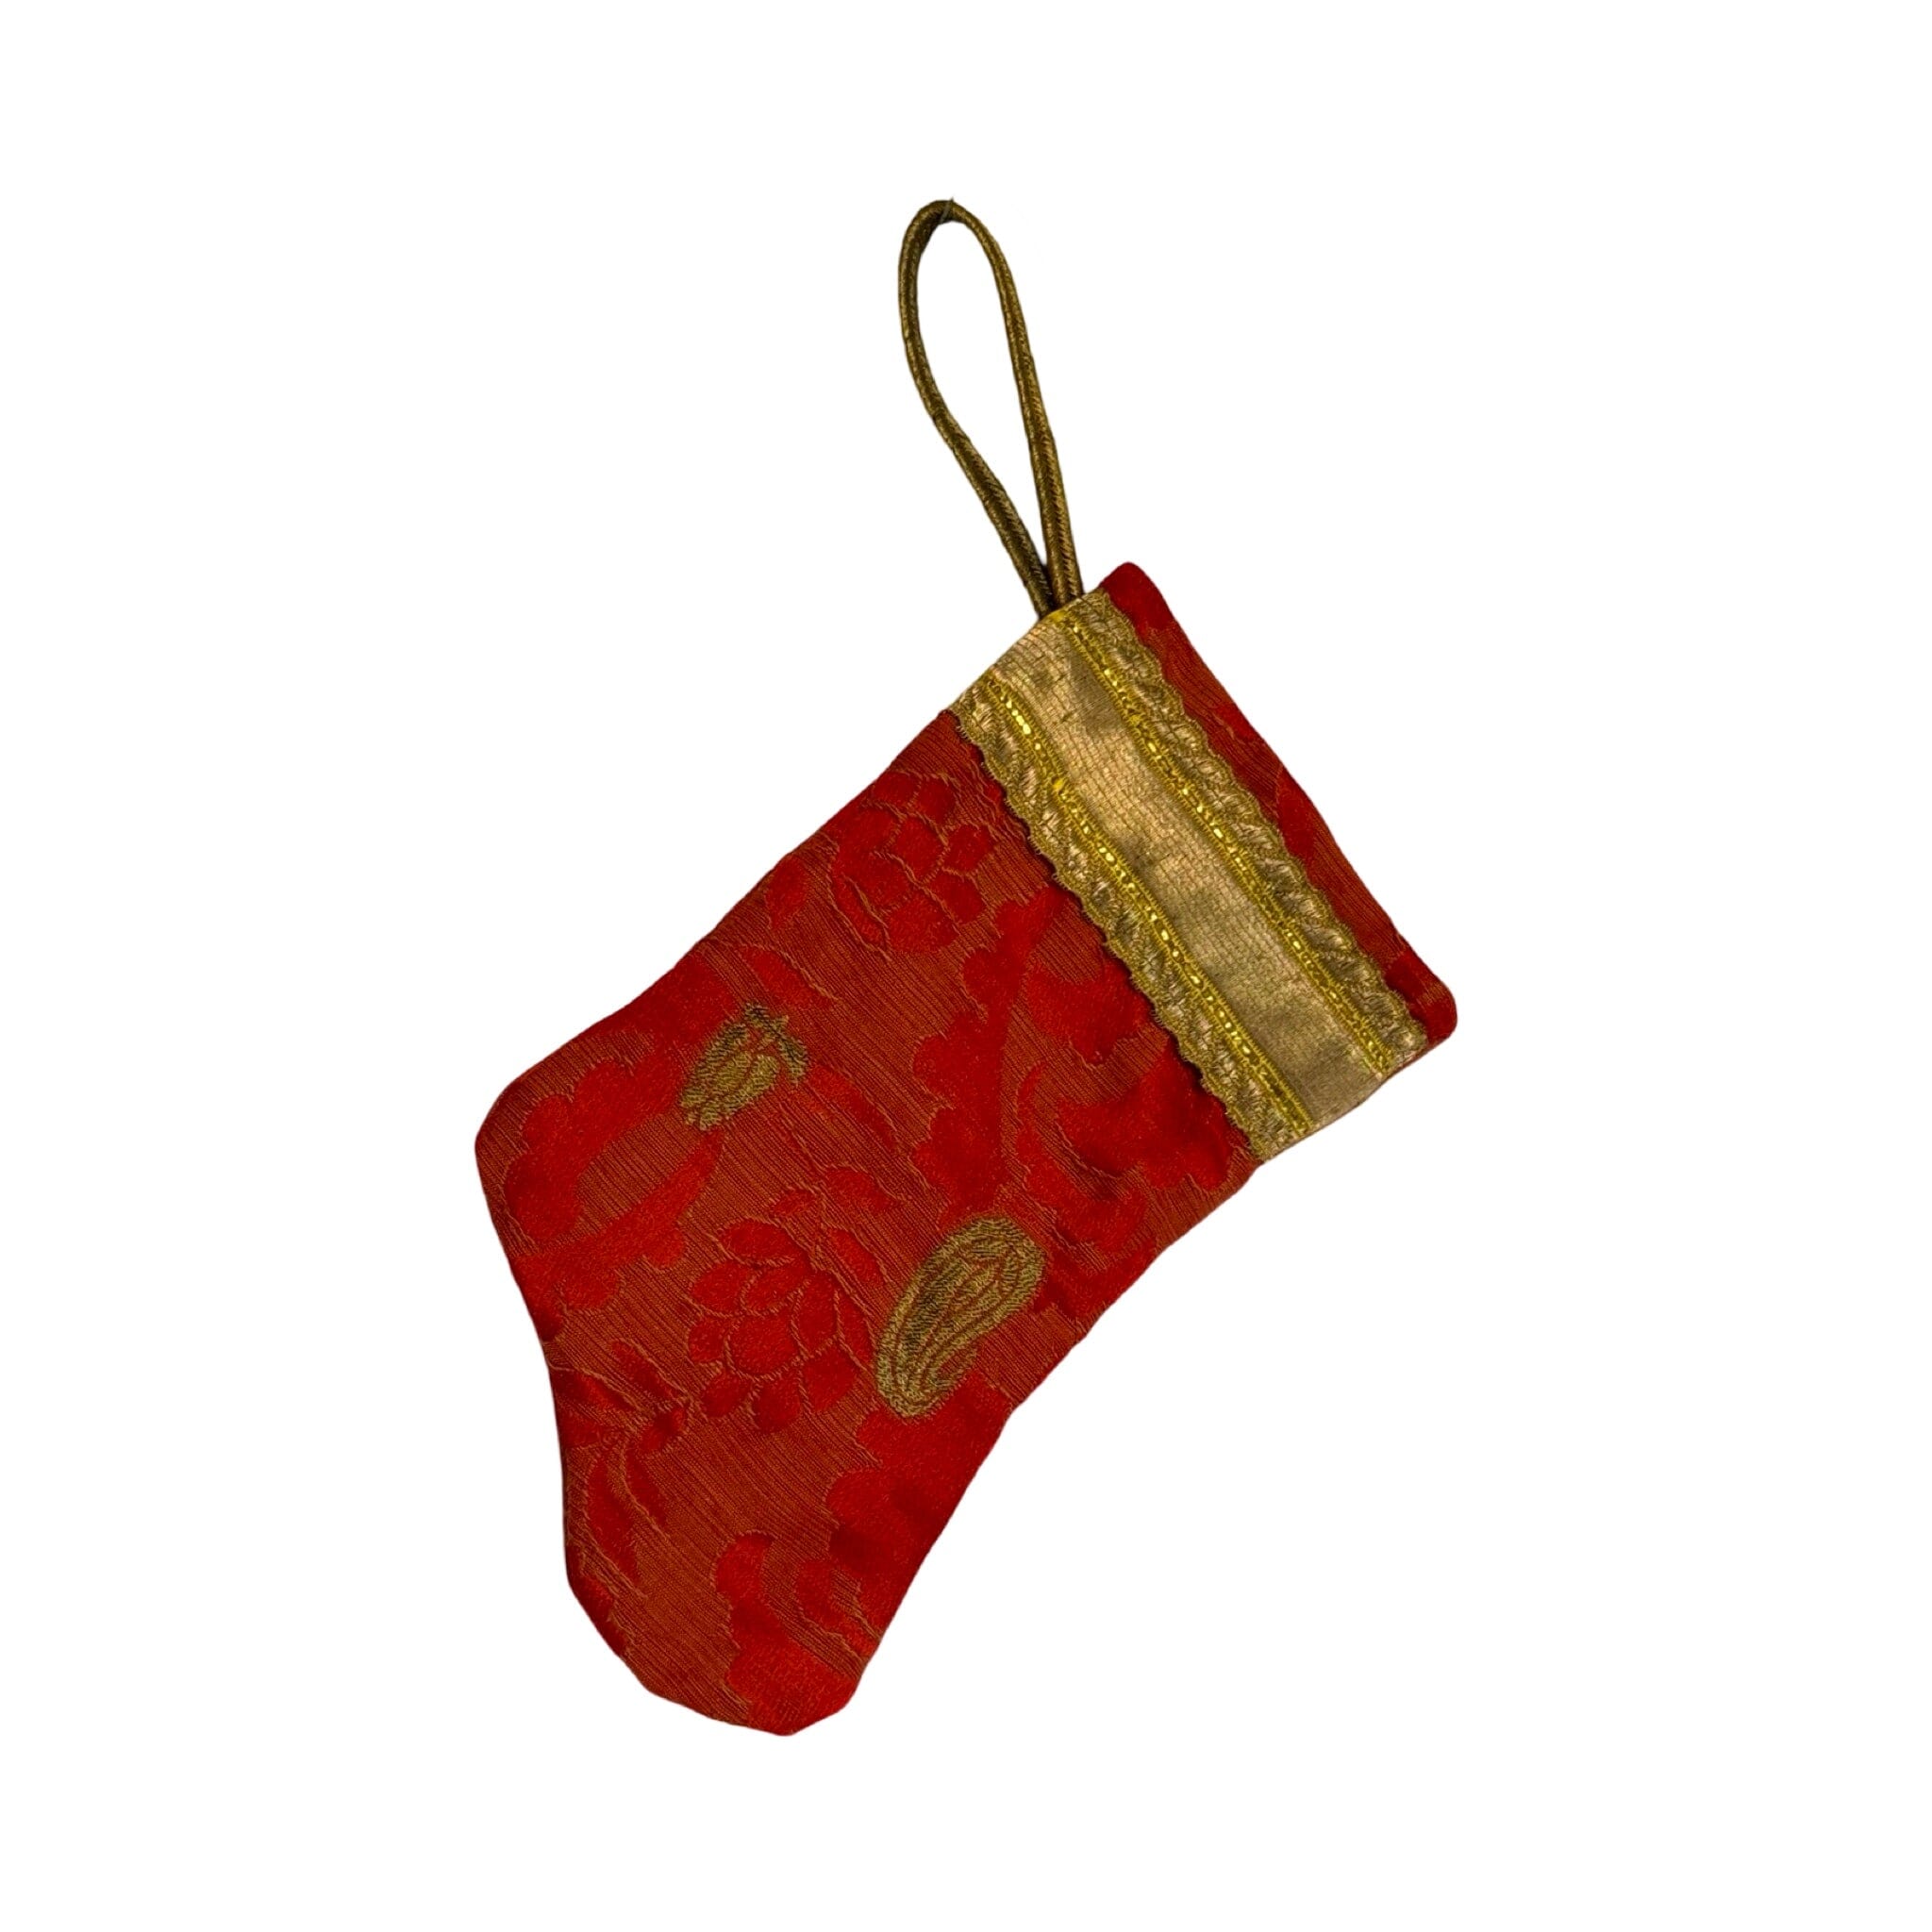 Handmade Mini Stocking Made From Vintage Fabric and Trims- Red and Gold Ornament B. Viz Design B 